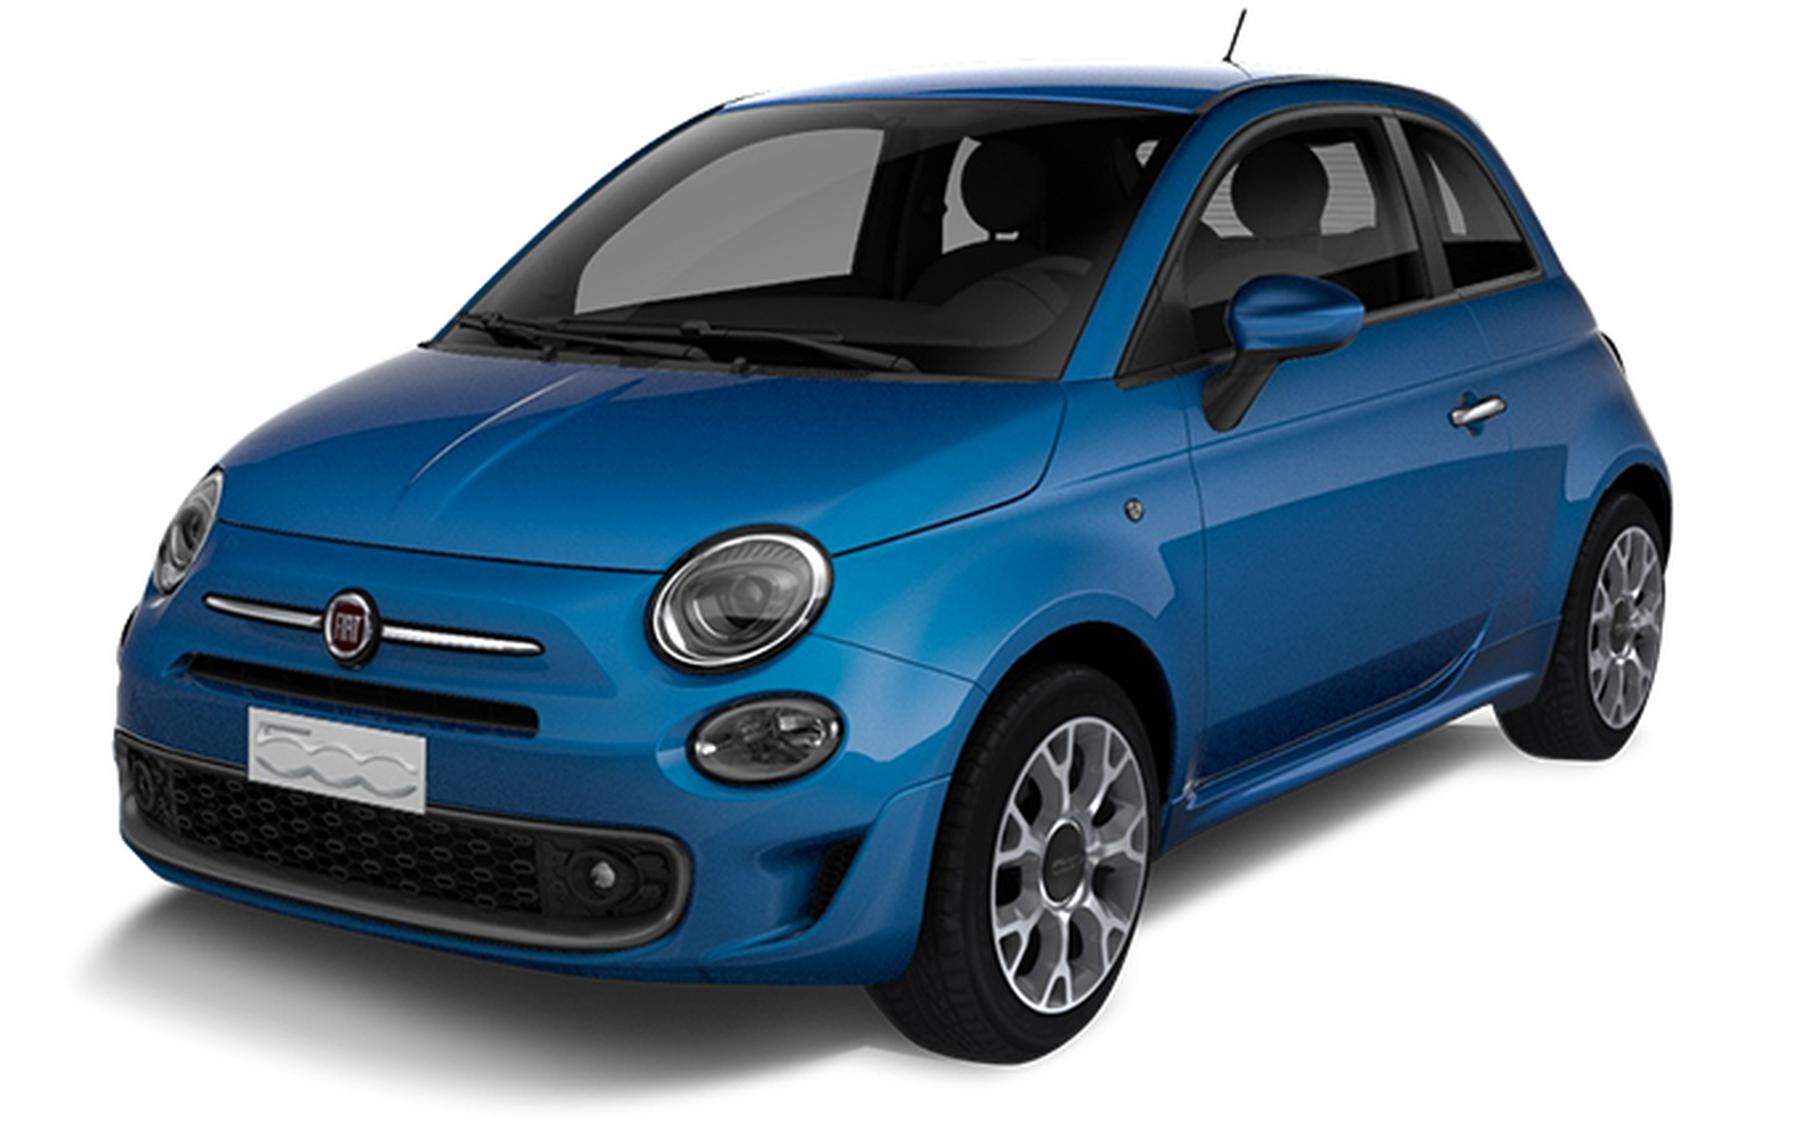 The refreshed Fiat 500 Connect